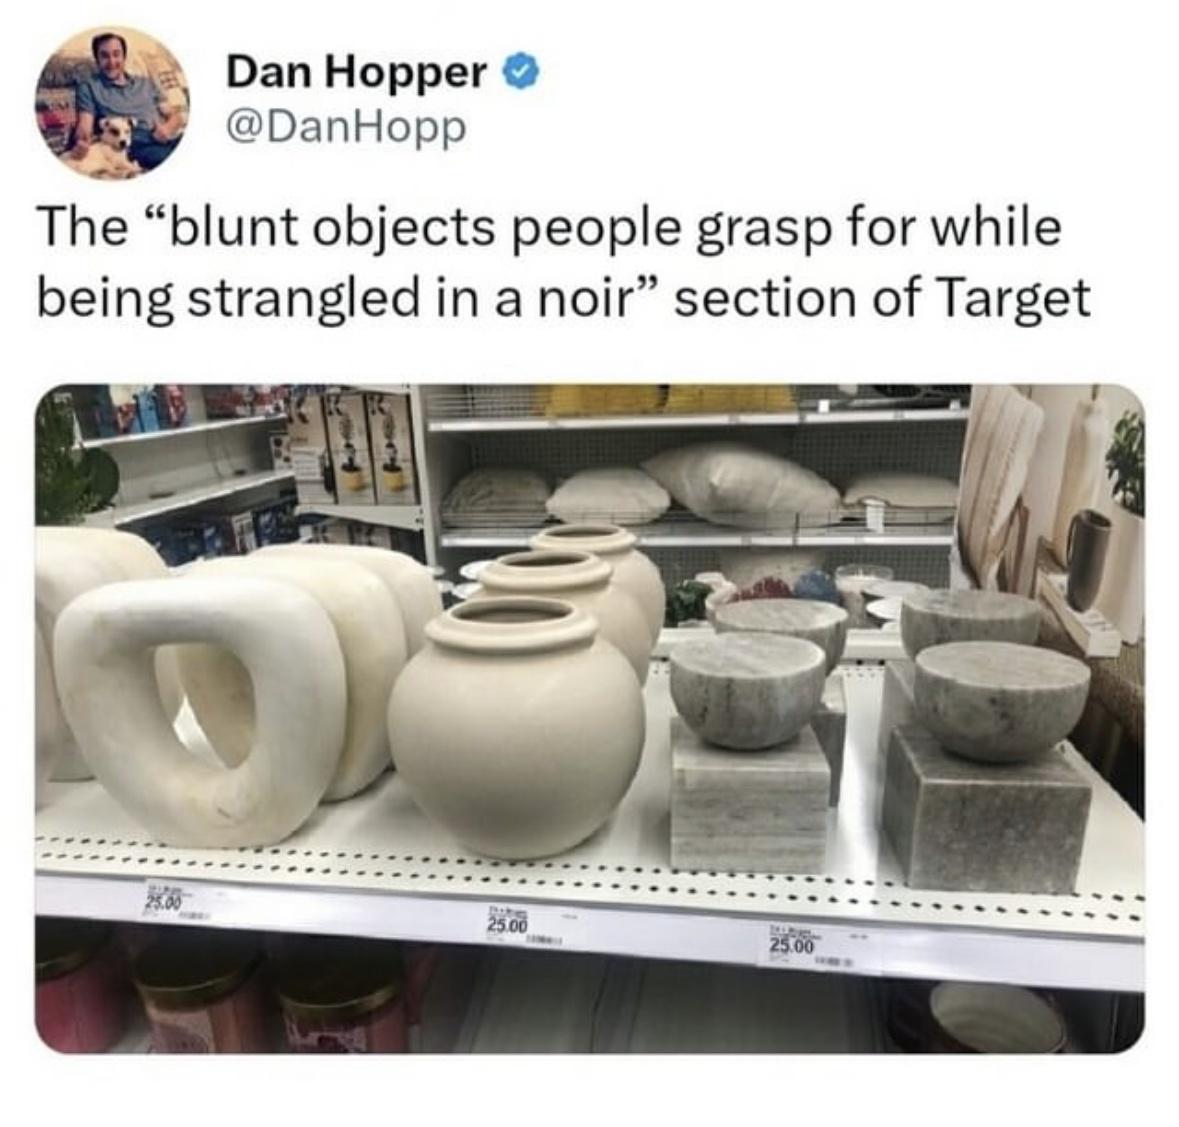 dank memes - - archaeological park of pompeii - Dan Hopper The "blunt objects people grasp for while being strangled in a noir" section of Target 25.00 Daring 25.00 Belost 25.00